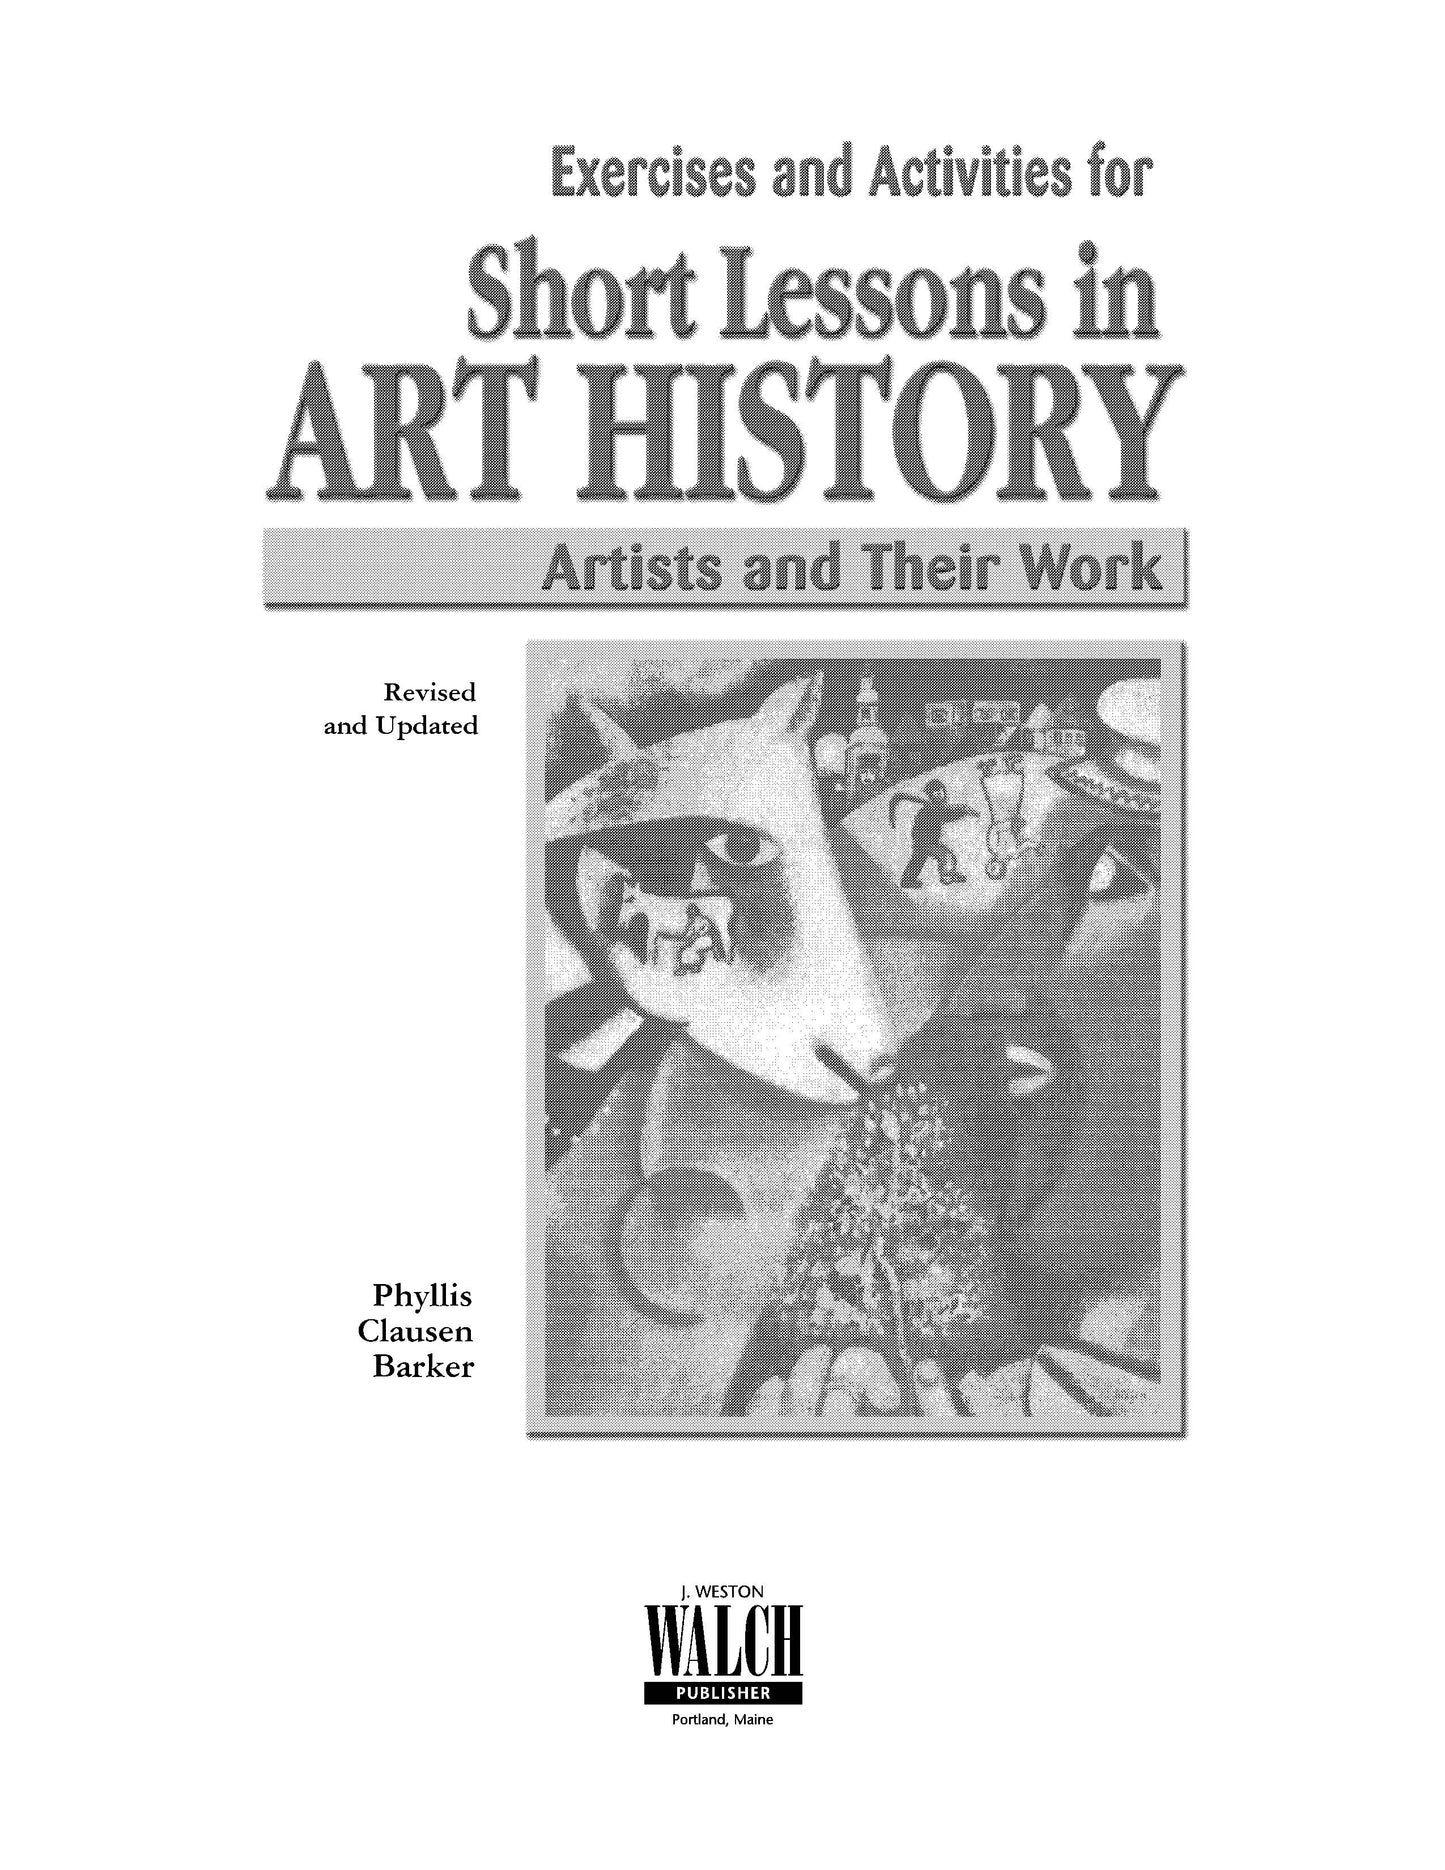 Bright Education Australia, Teacher Resources, Visual Art, Art, Book, drawing, painting, Short Lessons in Art History: Artists & Their Work, Exercises & Activities Student Book 